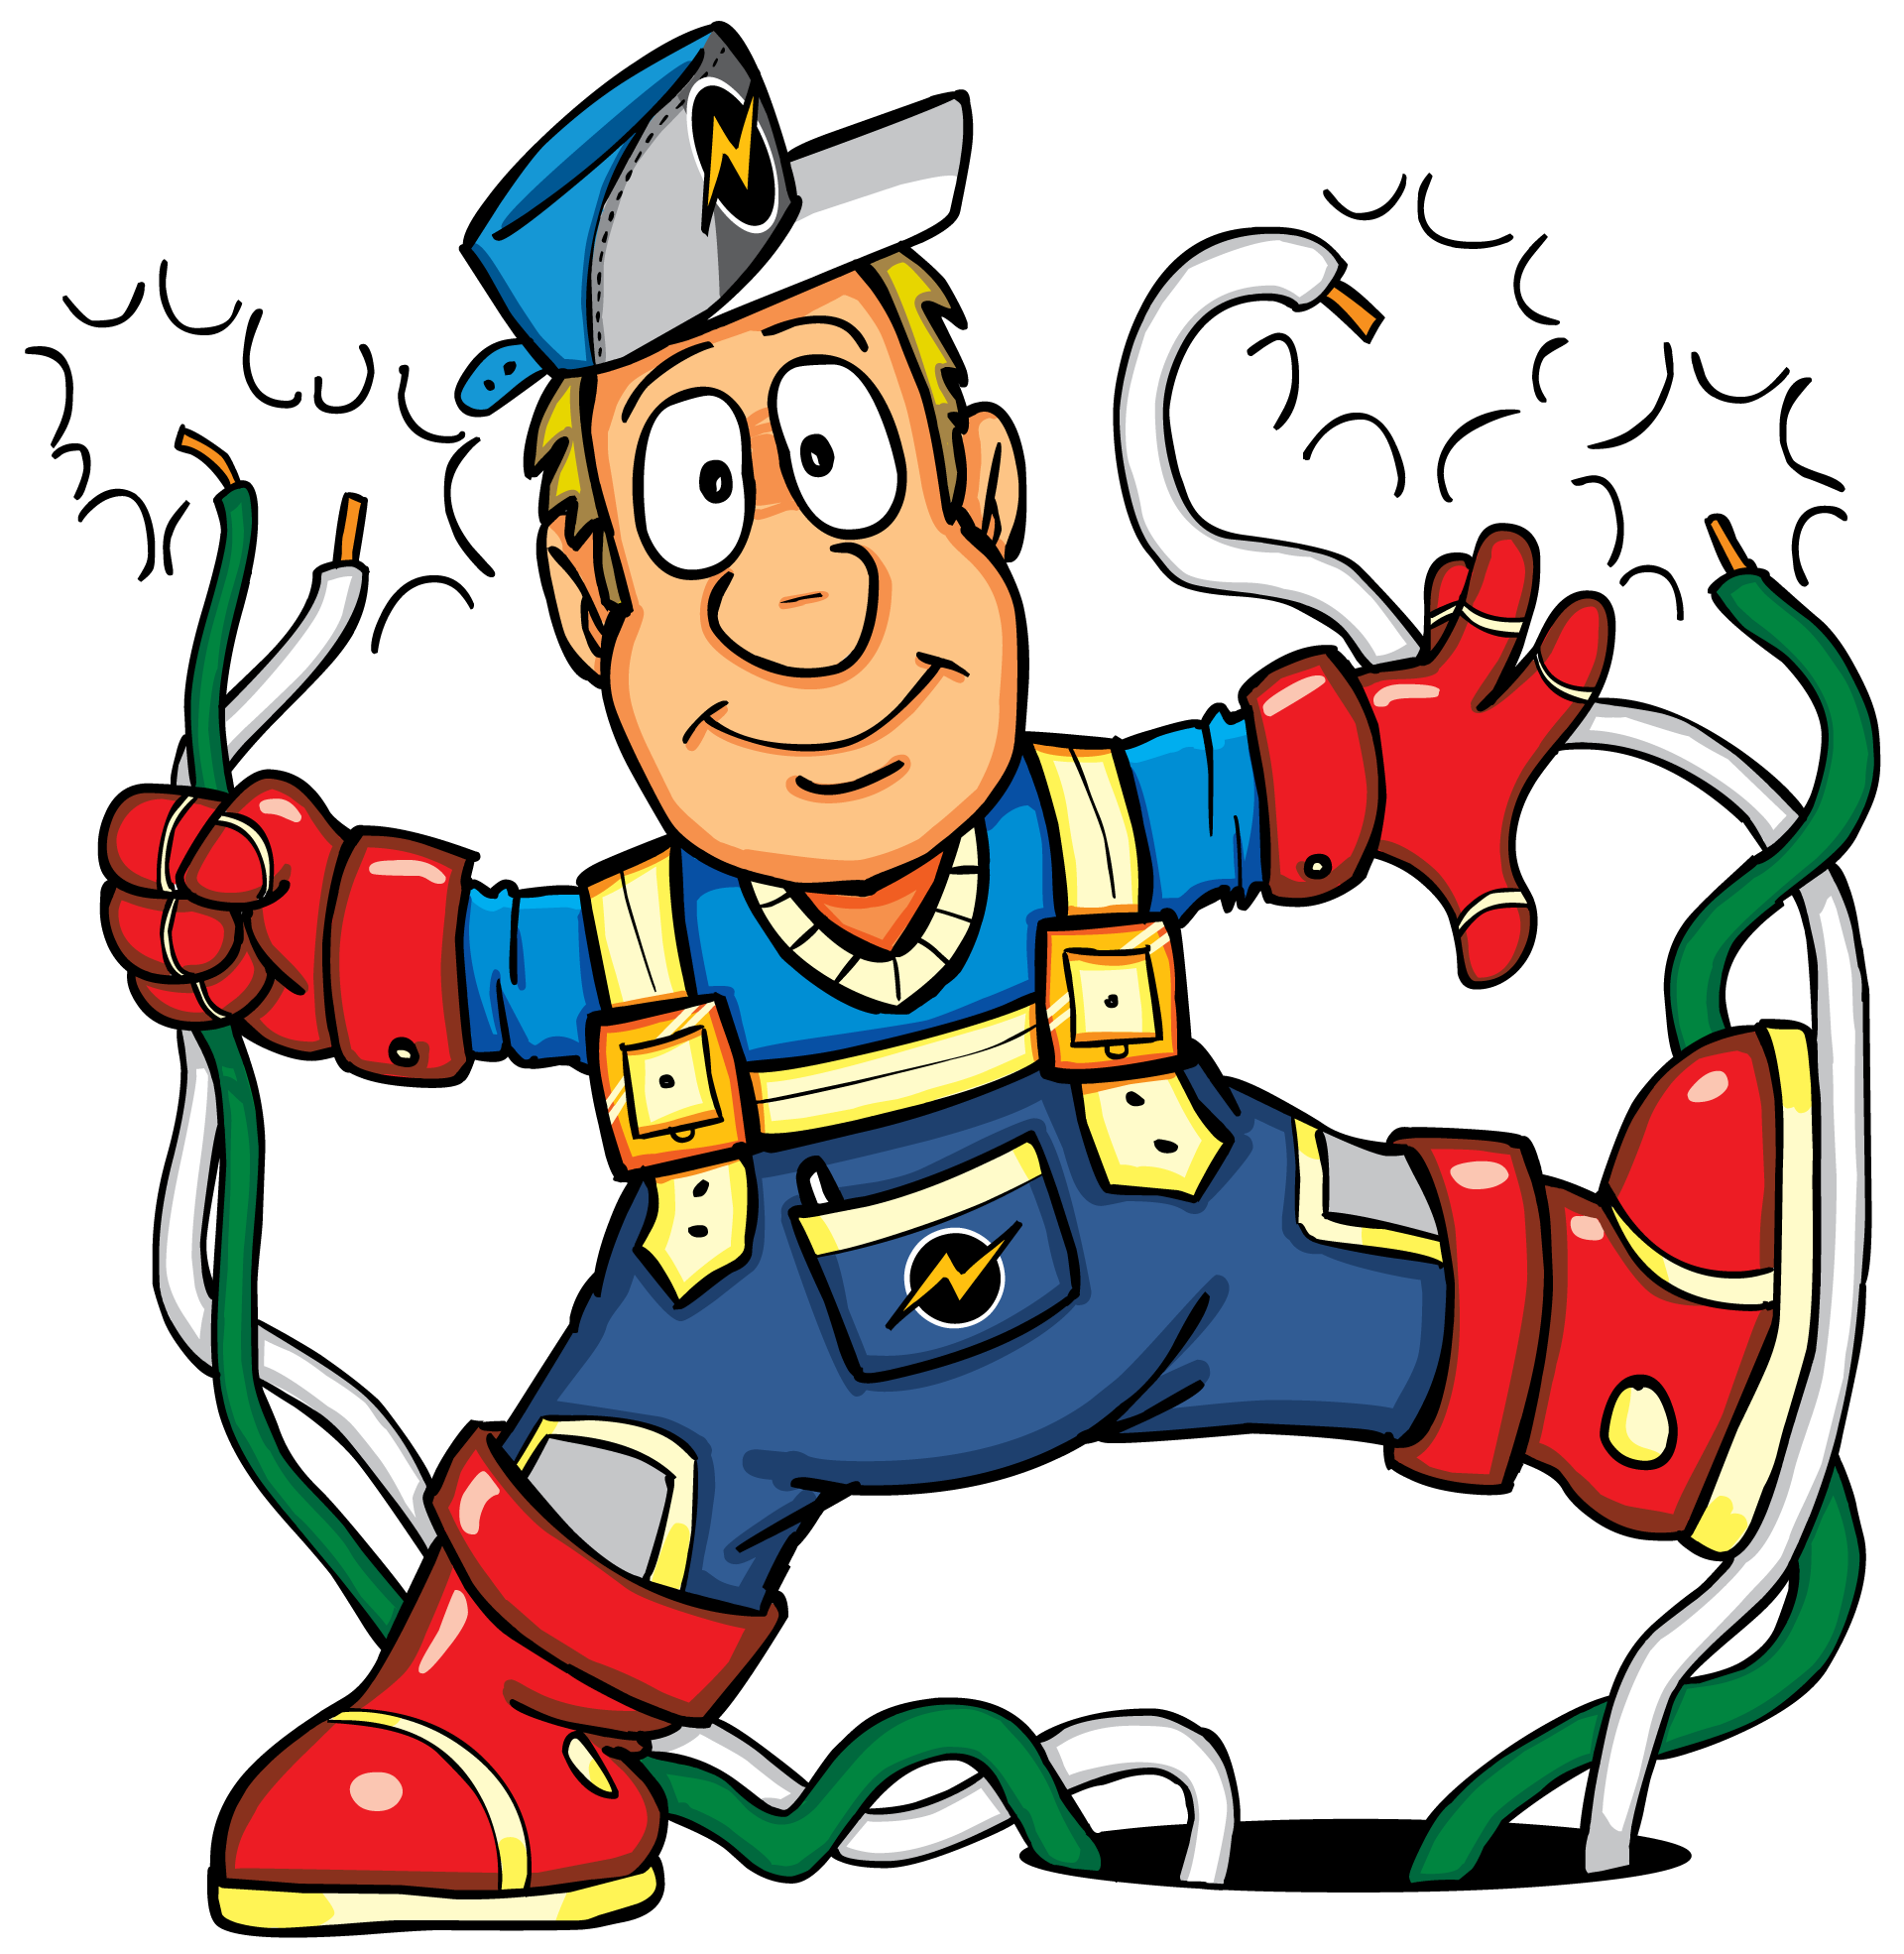 Plumber clipart electrical work. Air conditioning solar electricians